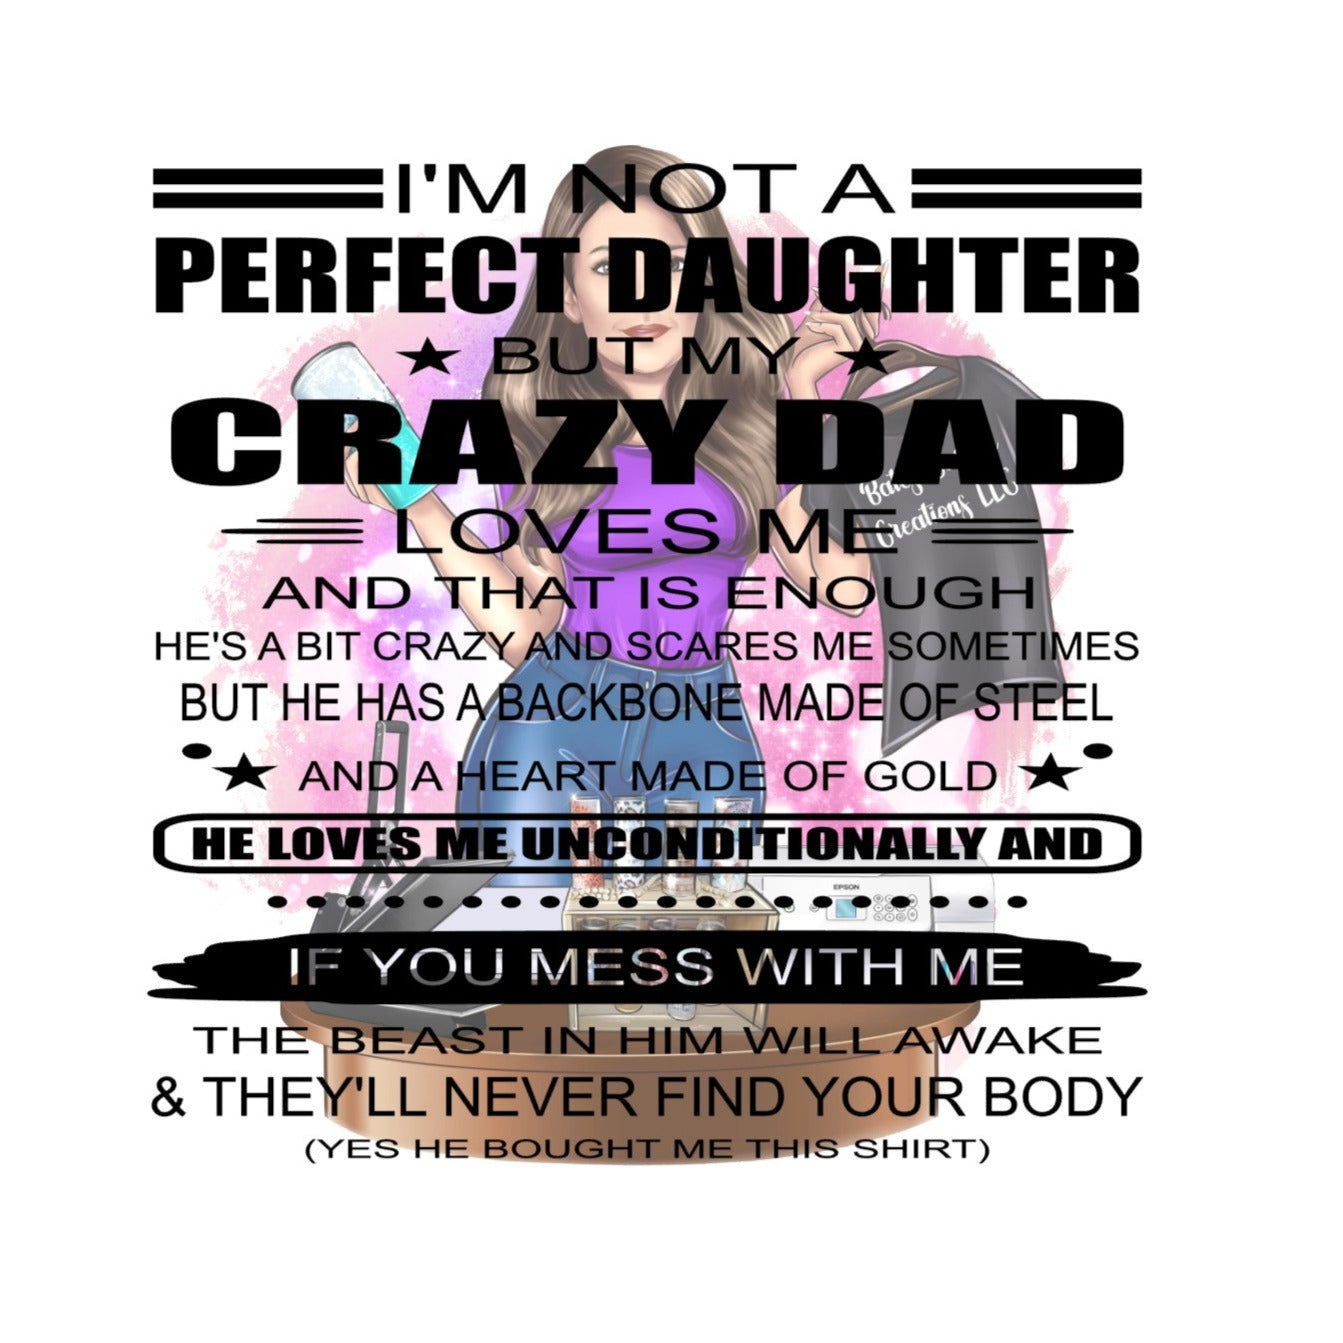 NOT A PERFECT DAUGHTER